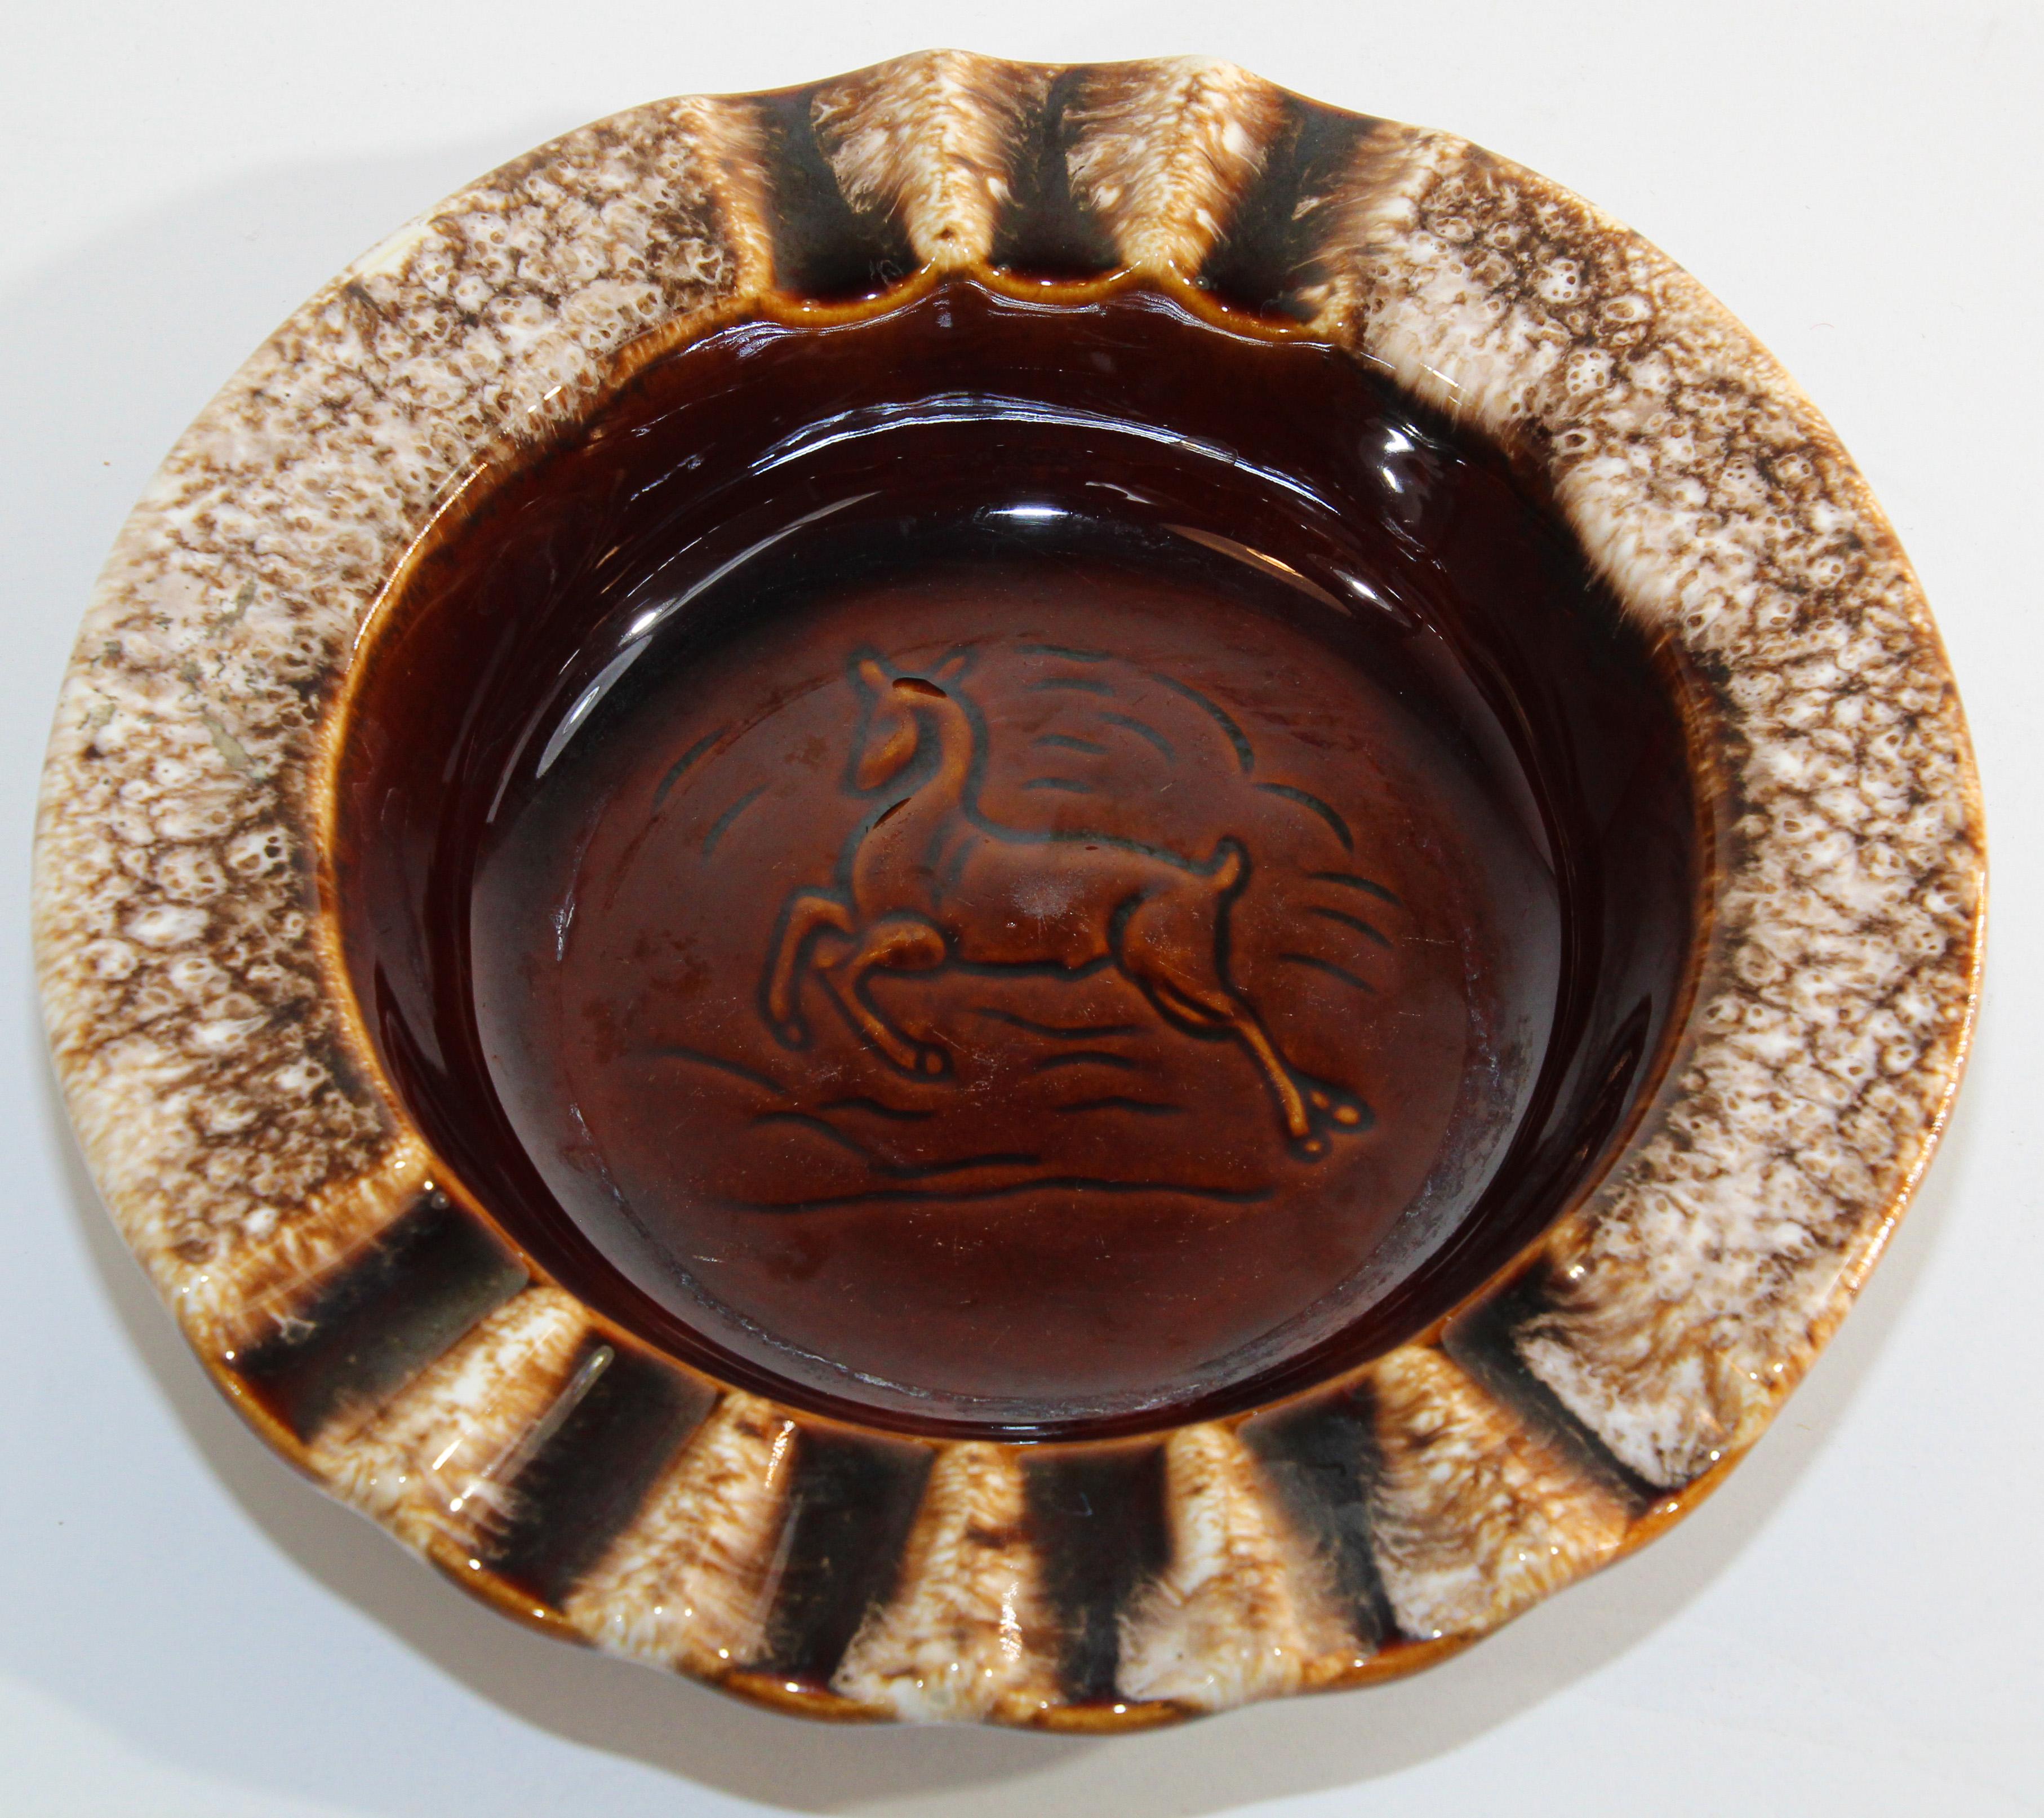 Vintage, classic mid-century modern ashtray in brown and white glazed ceramic.
Hull USA, Vintage pottery ashtray with a leaping deer figure.
Brown glazed round collector ashtray.
Great collectible Tobacciana Mid Century cigar or cigarettes